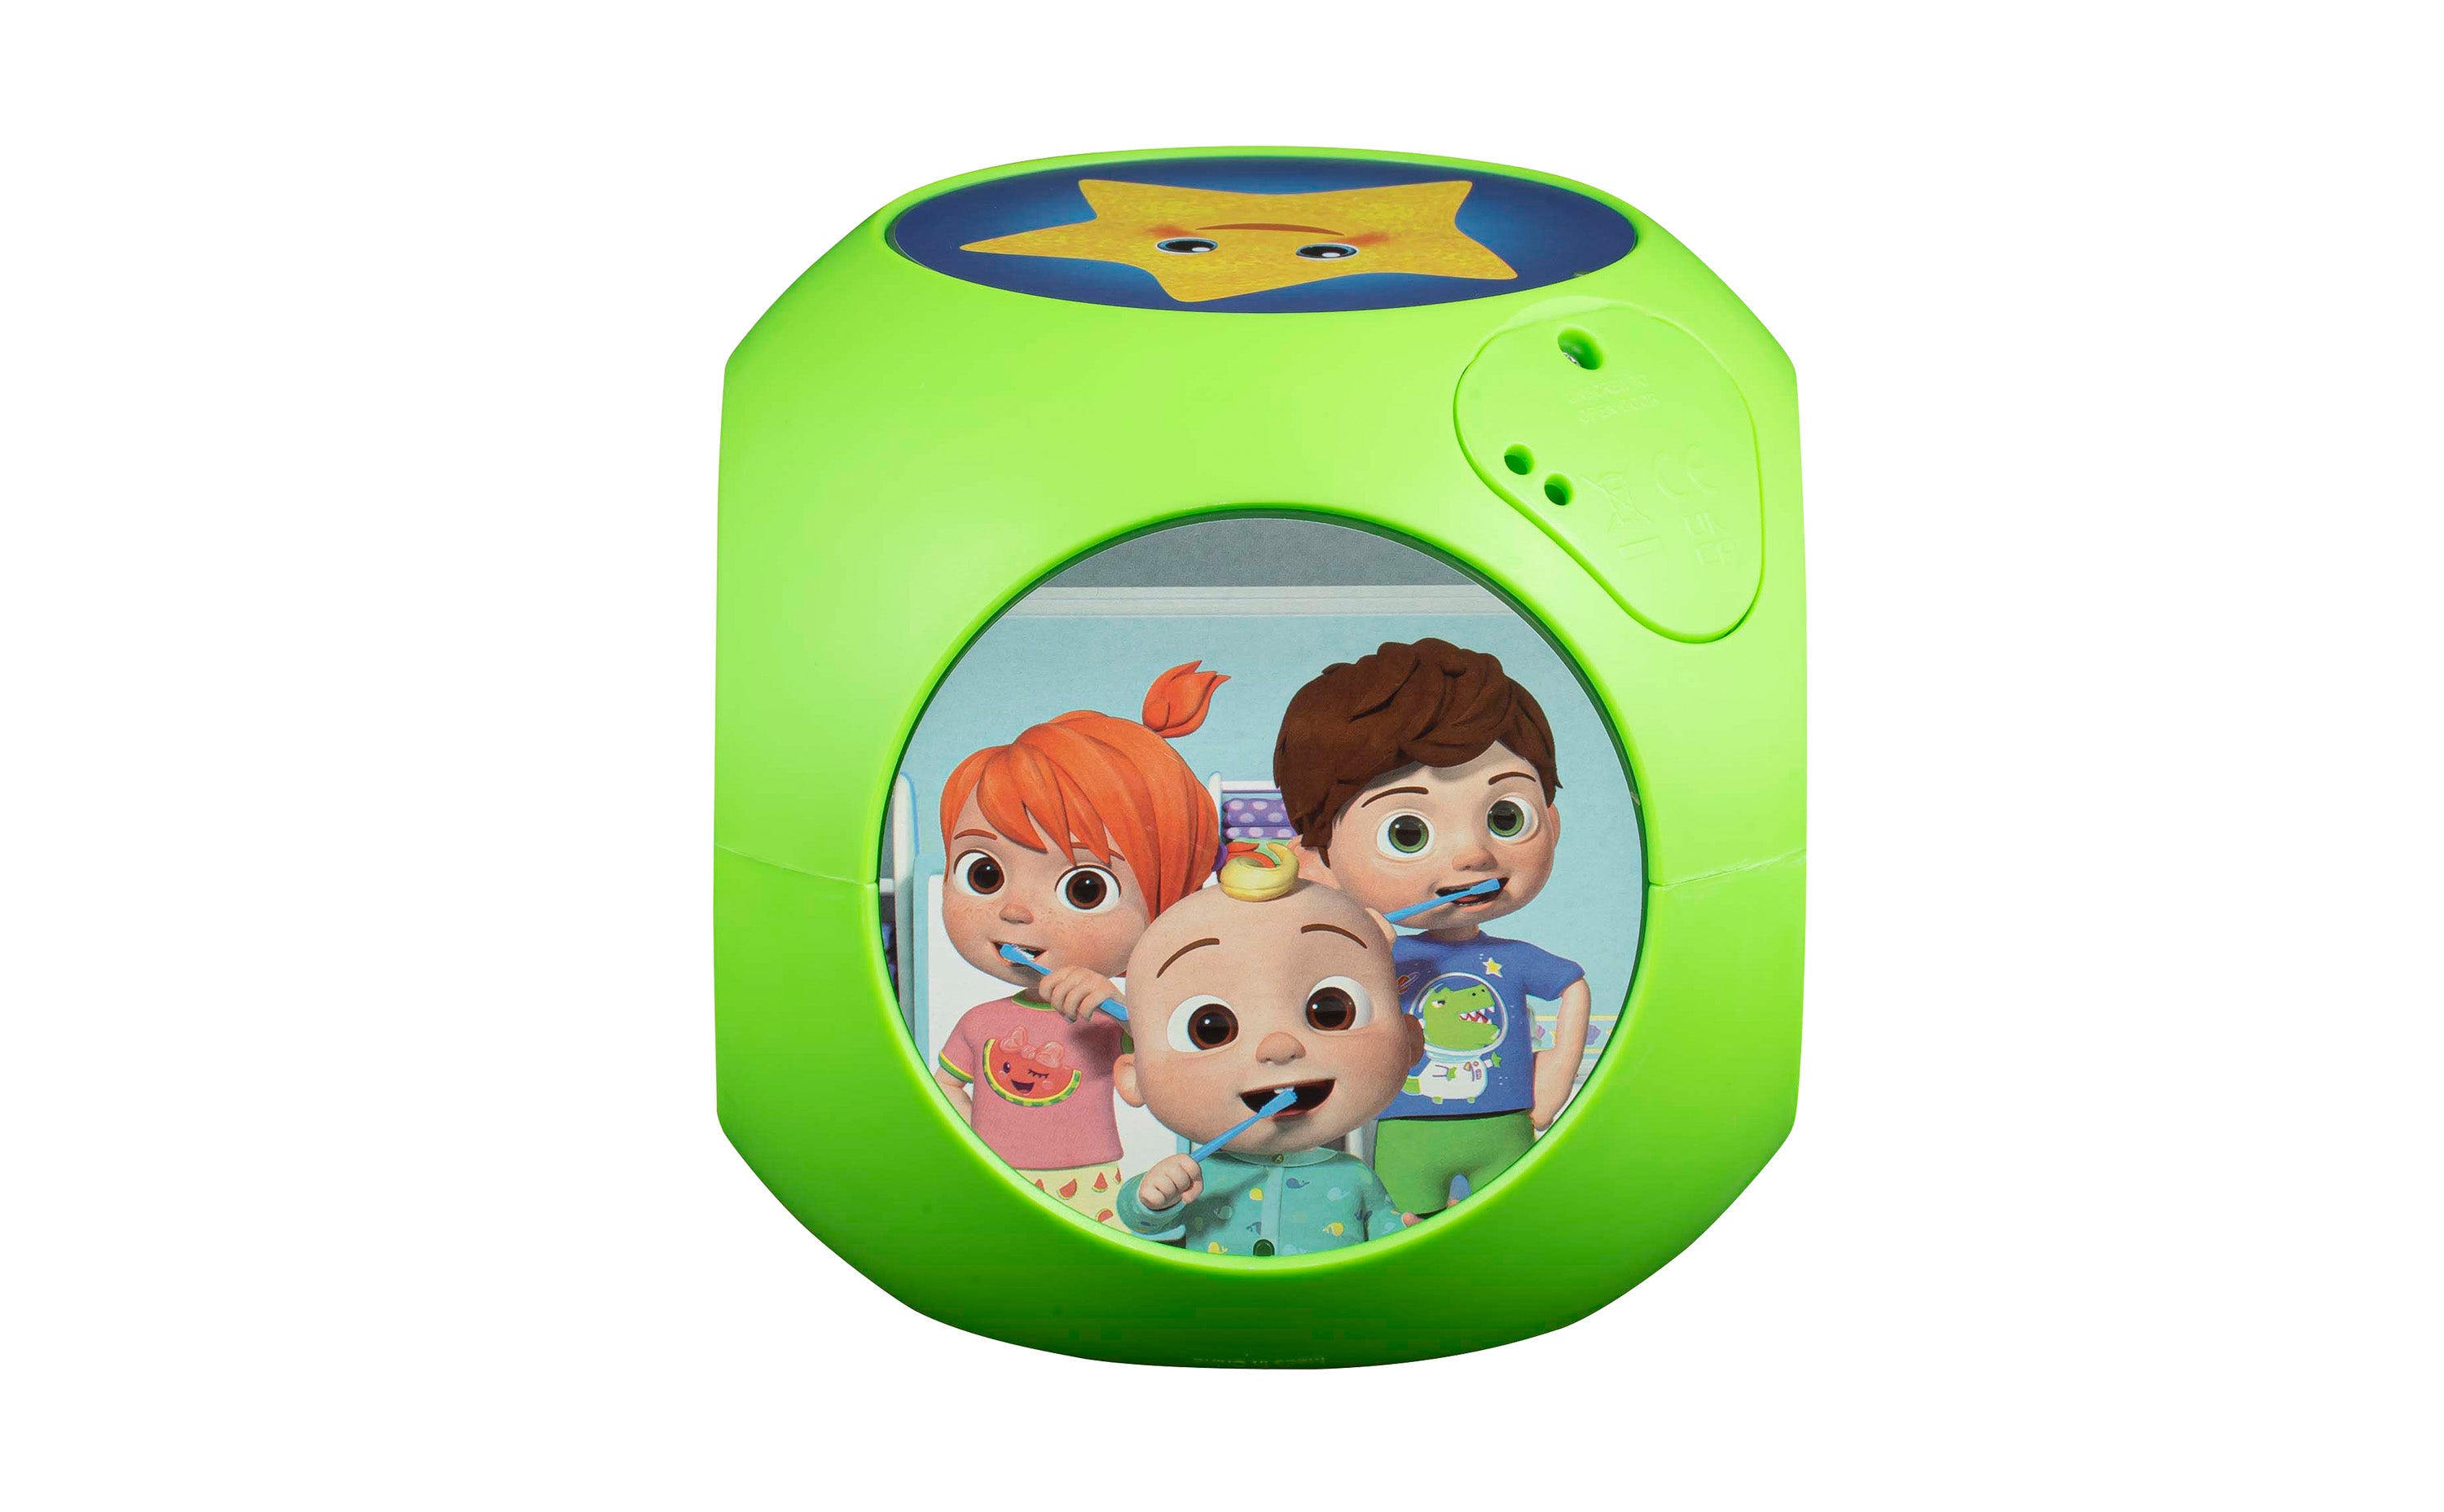 eKids Cocomelon Toy Music Player Includes Freeze Dance, Musical Toy for  Toddlers with Built-in Nursery Rhymes for Fans of Cocomelon Toys and Gifts  for